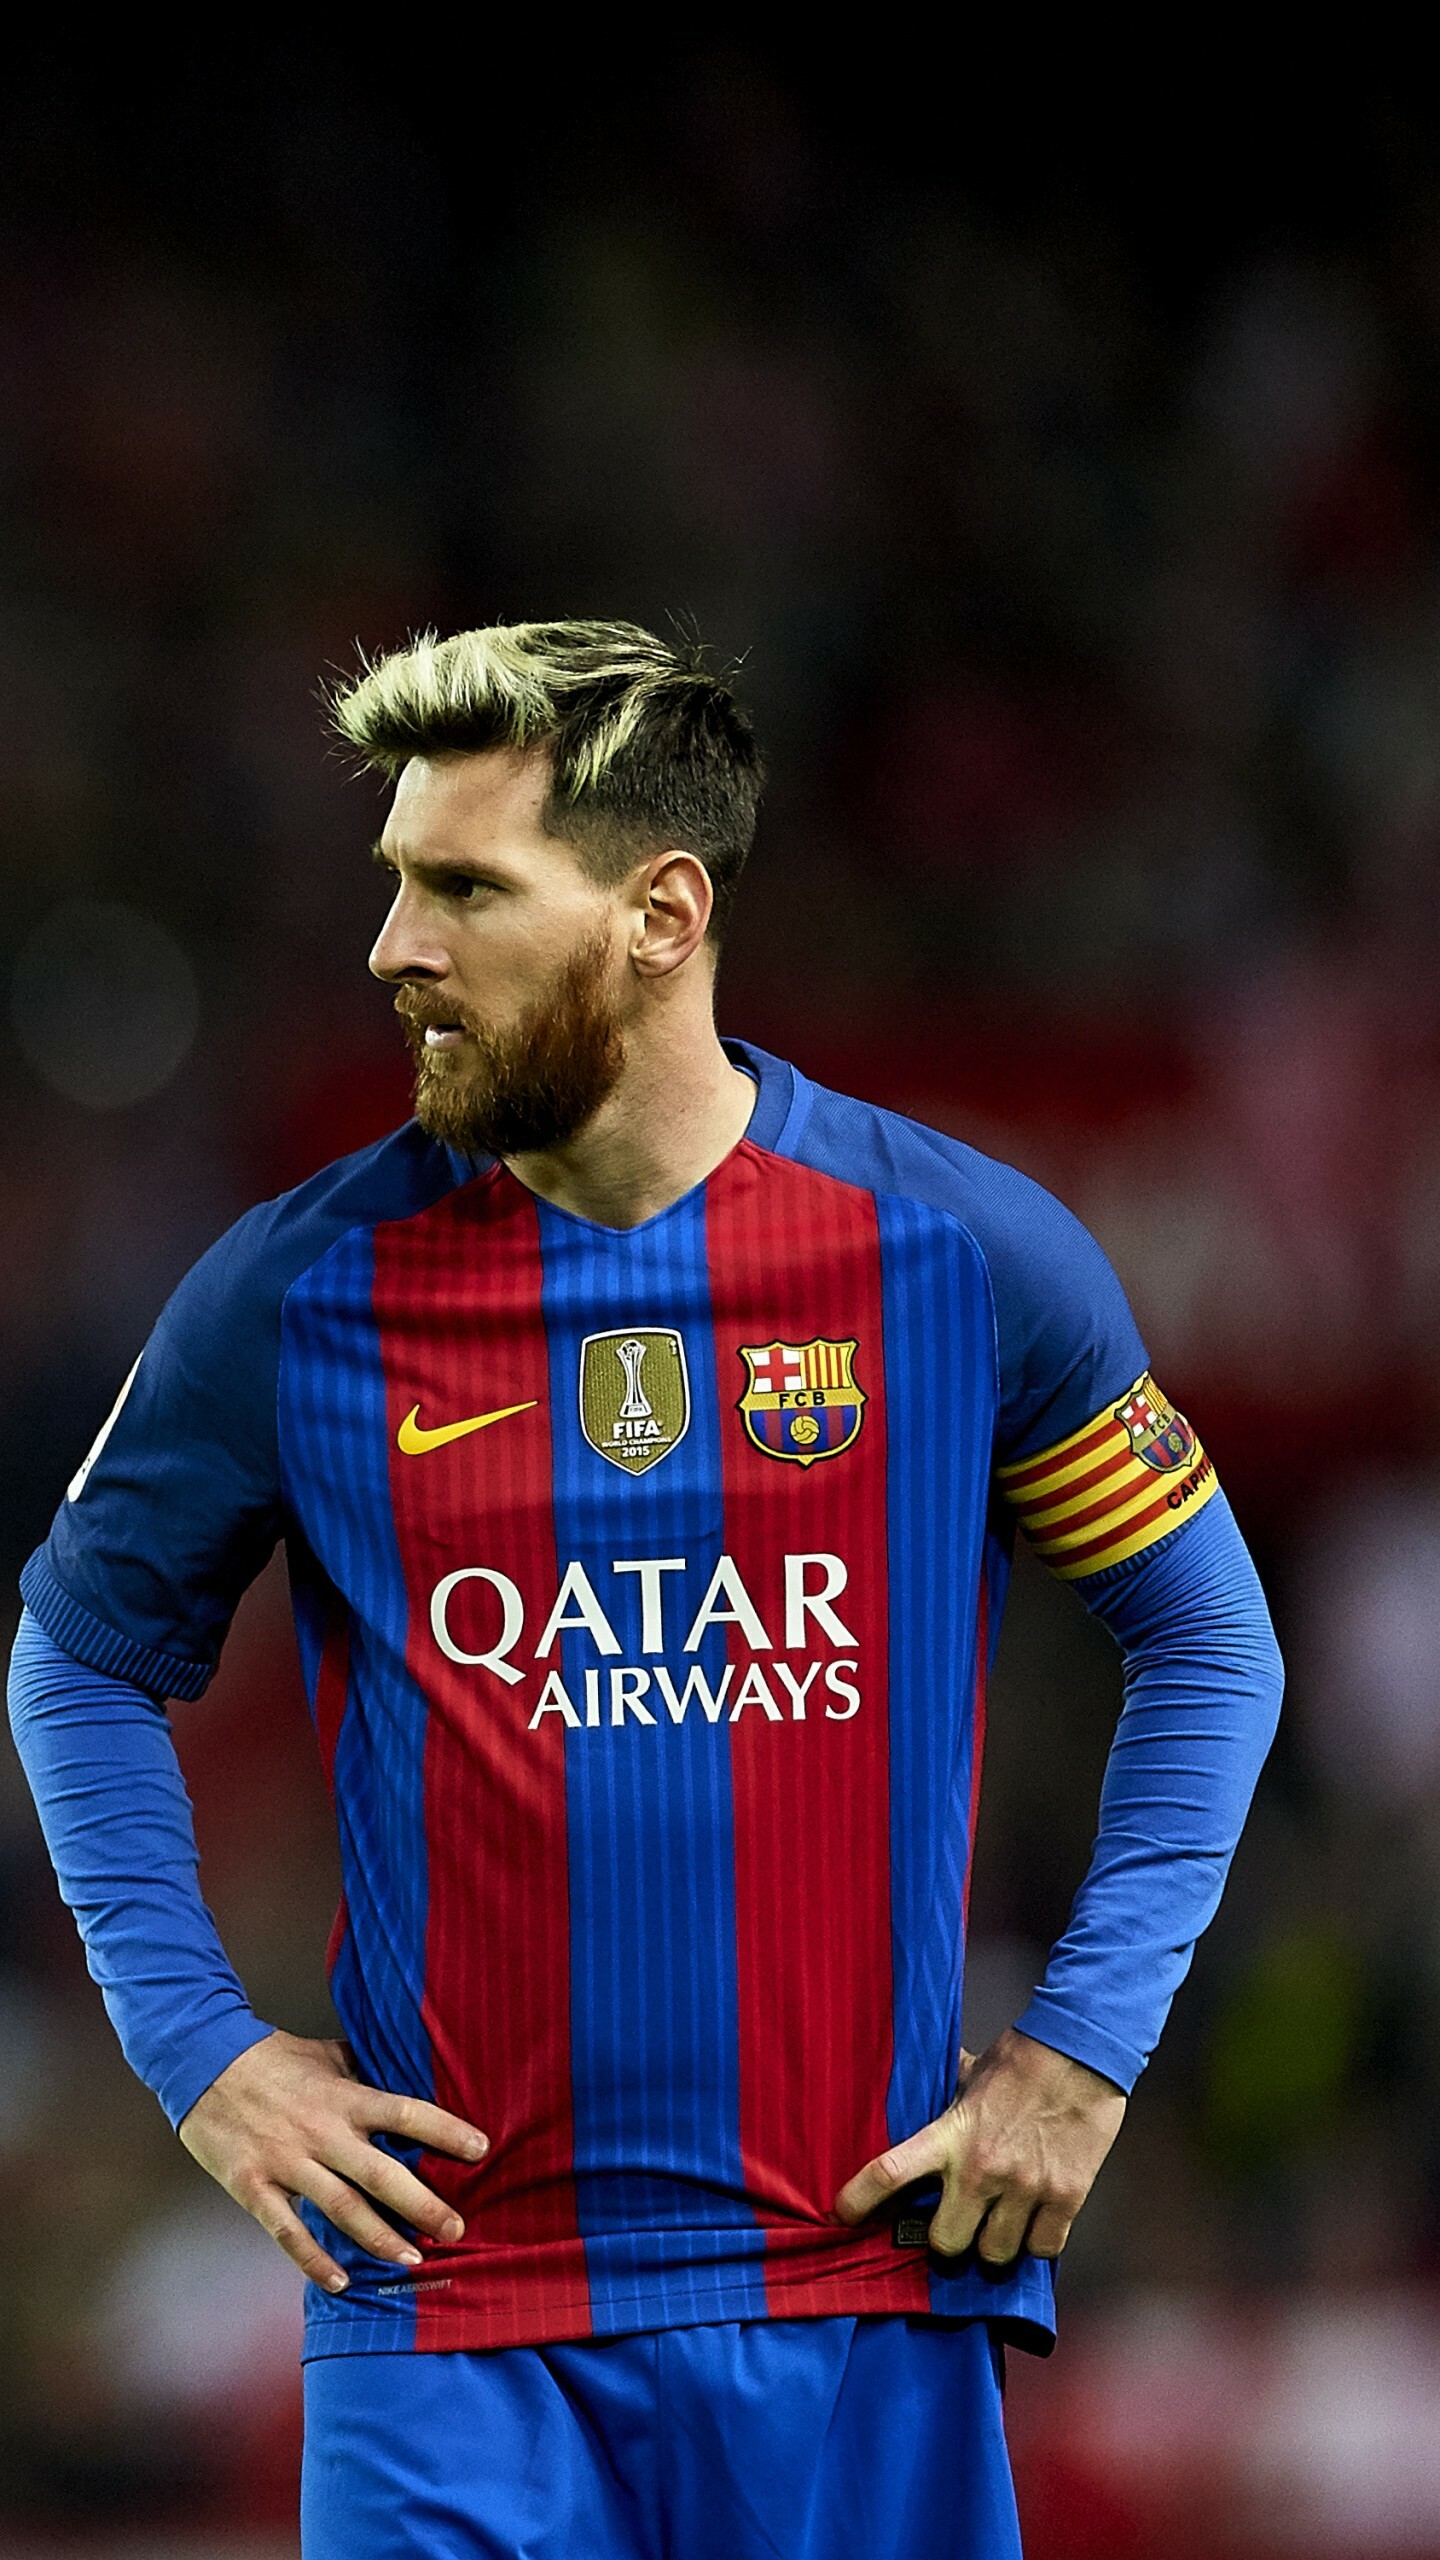 Lionel Messi: He holds the record for most assists in La Liga (192) and the Copa América (17). 1440x2560 HD Wallpaper.